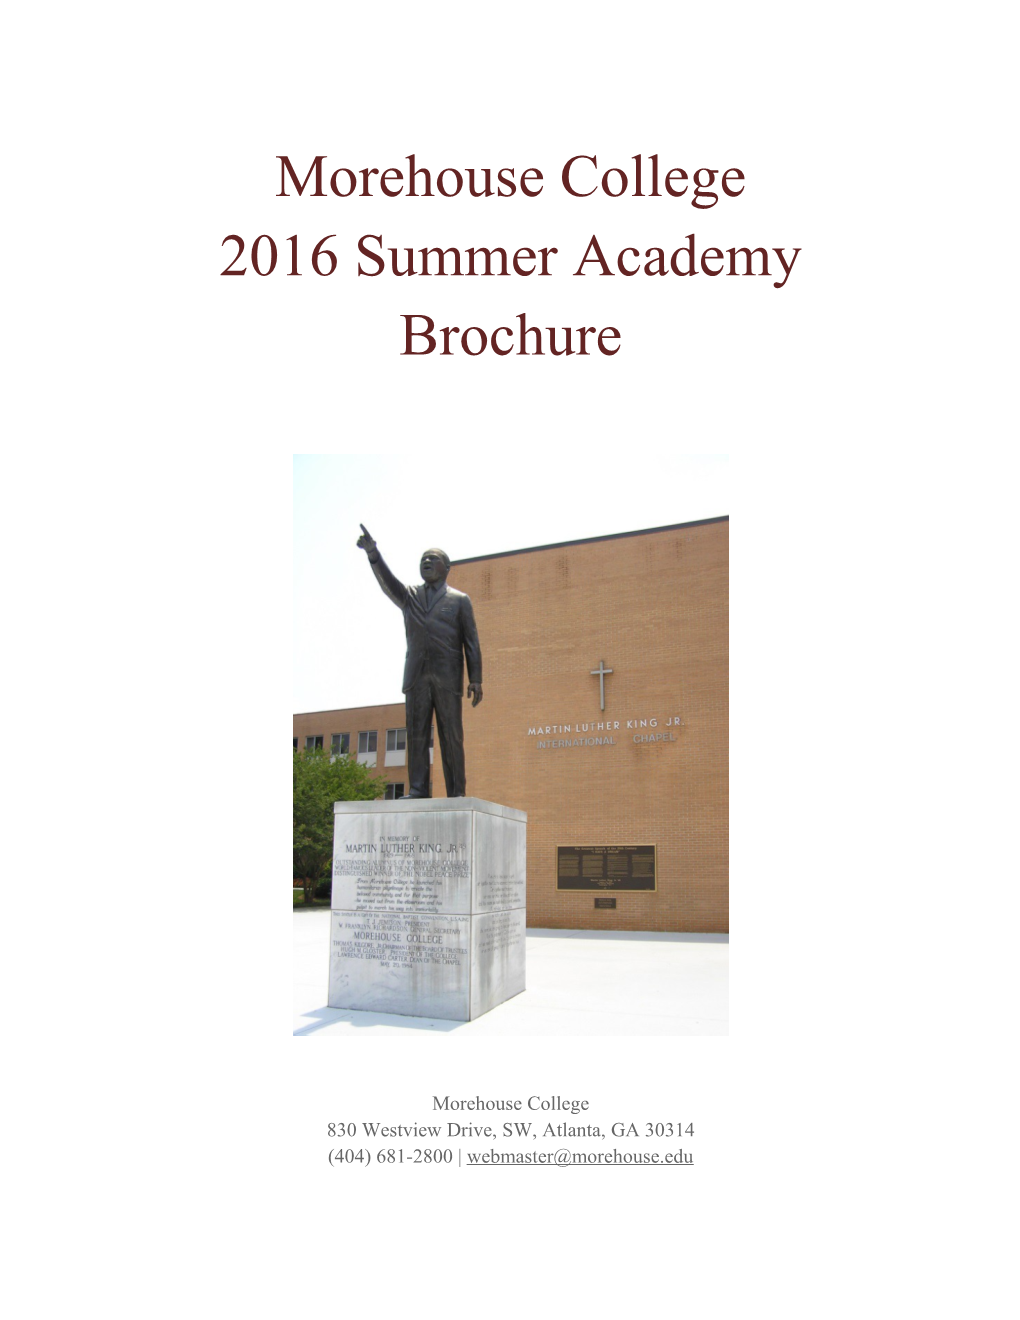 Morehouse College 2014 Summer Academy Brochure